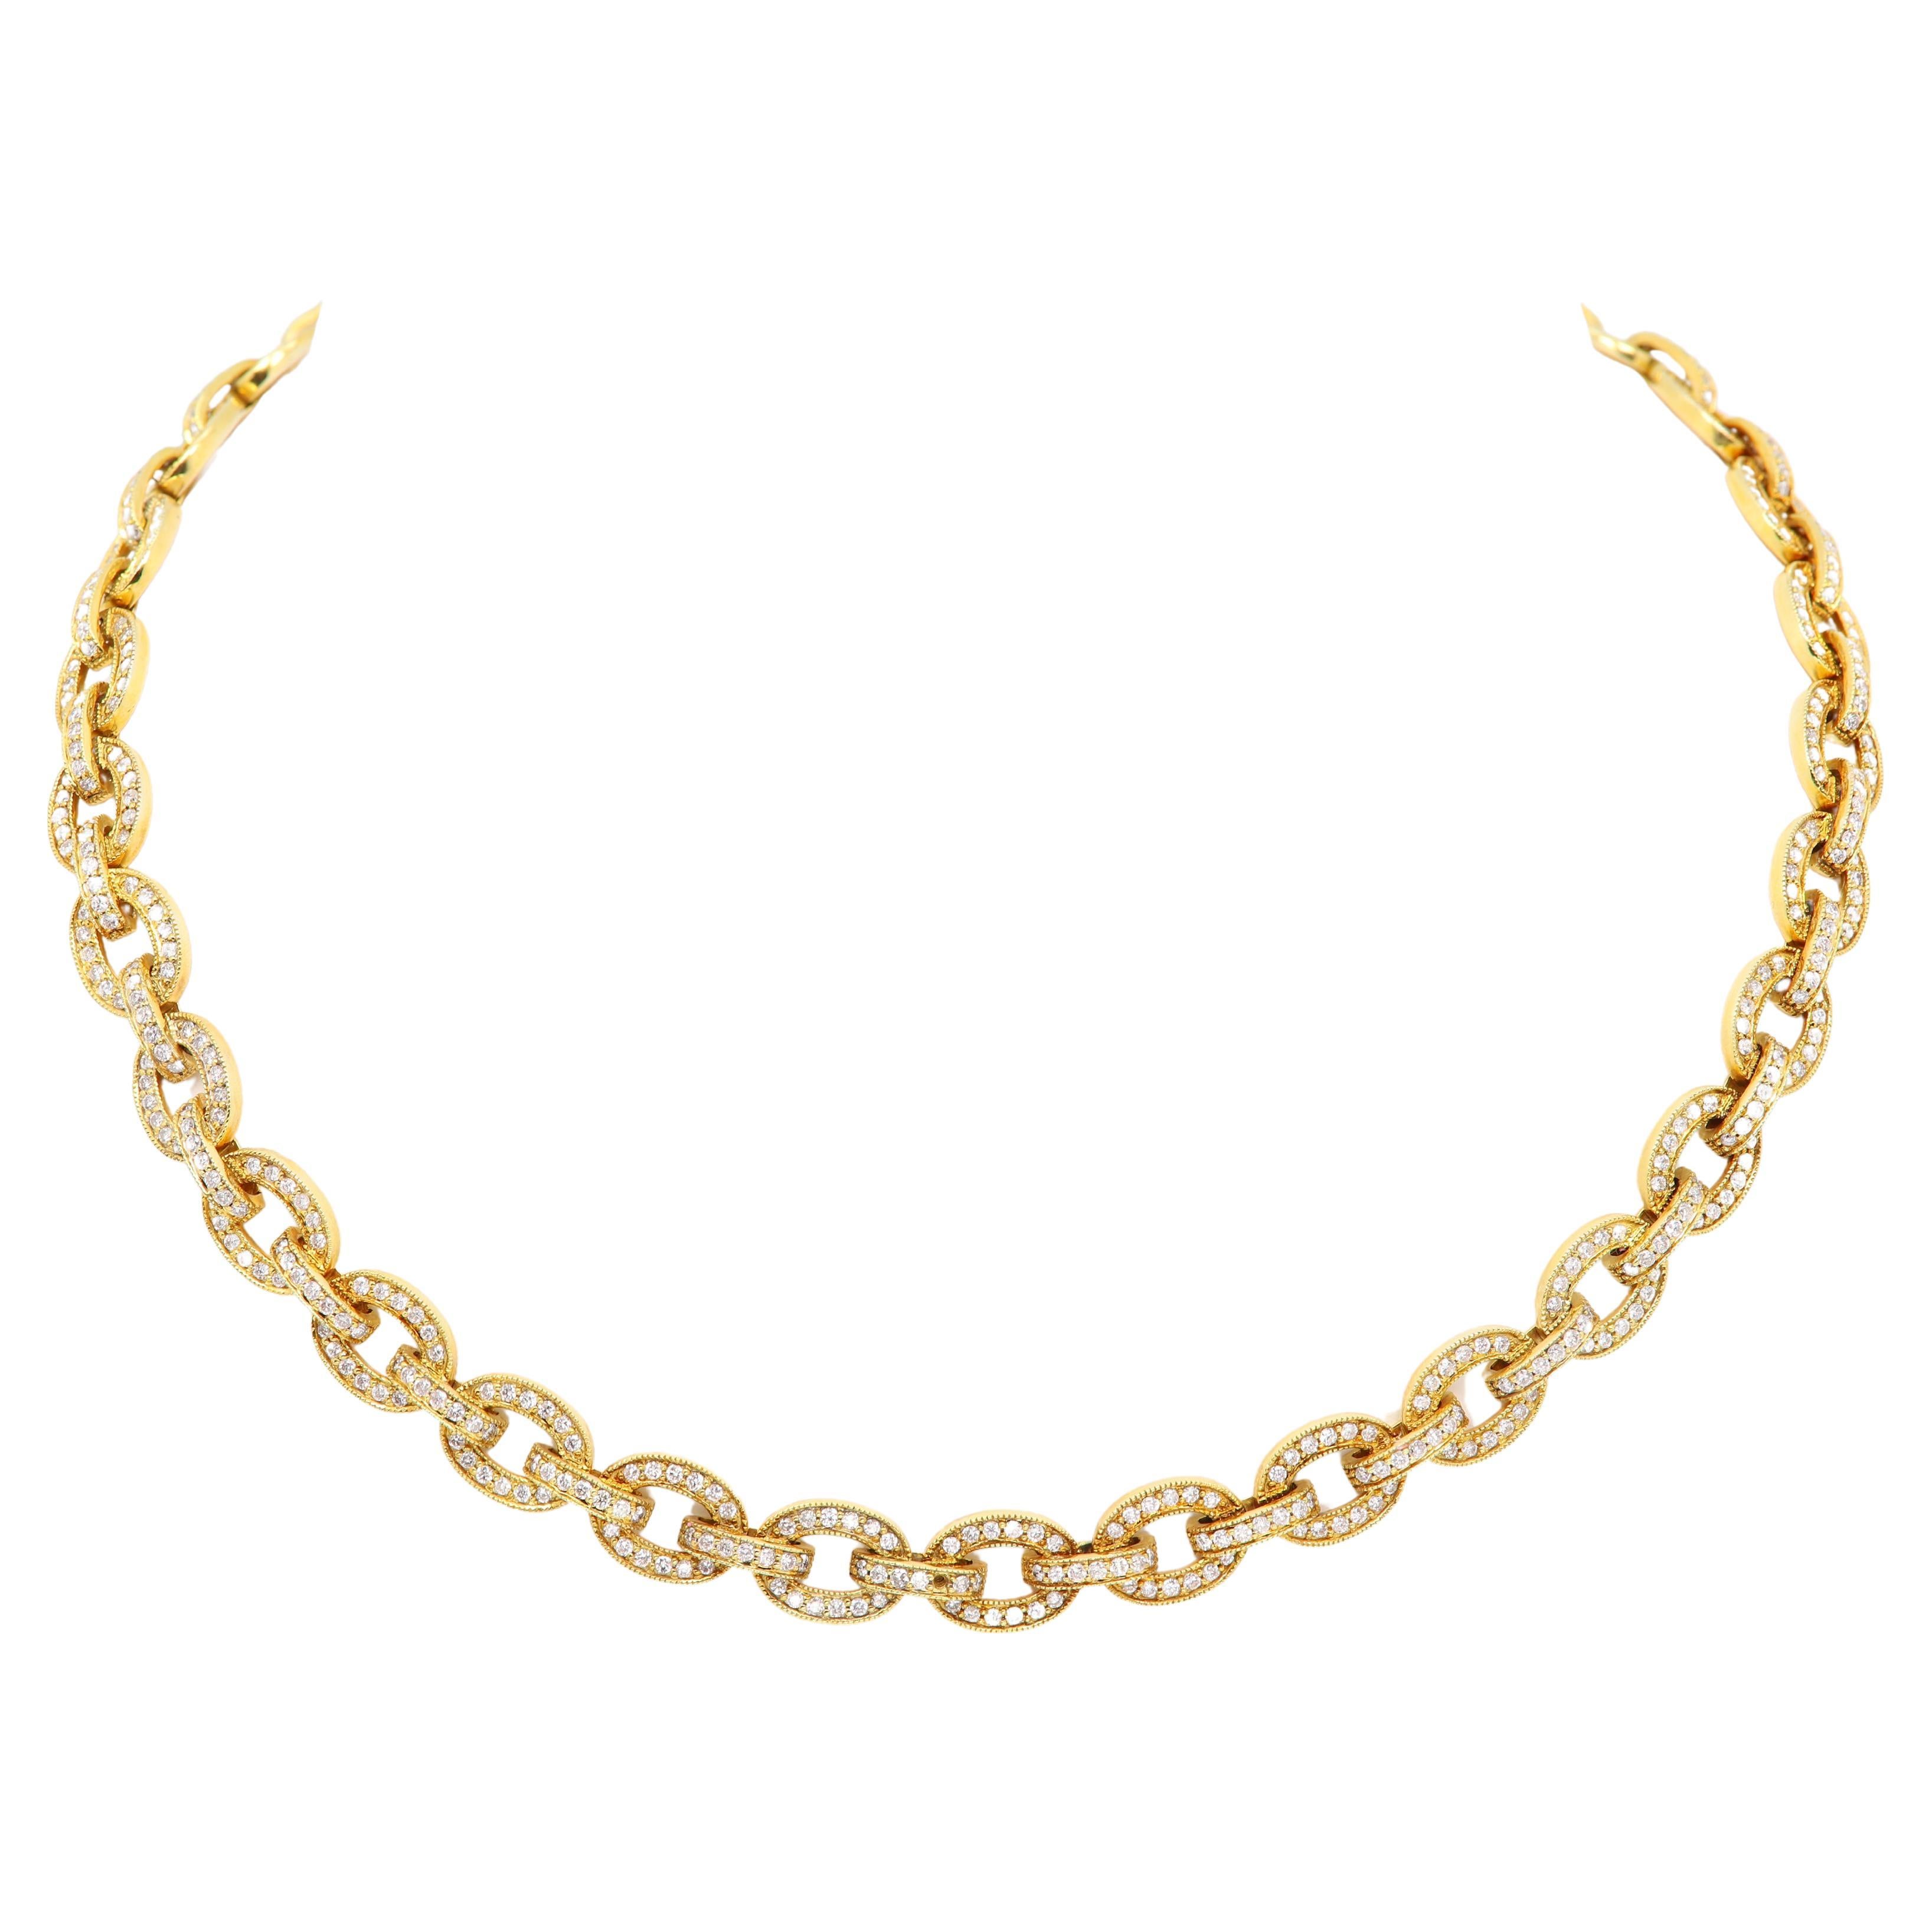 Fancy Necklace Natural Diamond Necklace 14 Karat Yellow Gold Link Chain